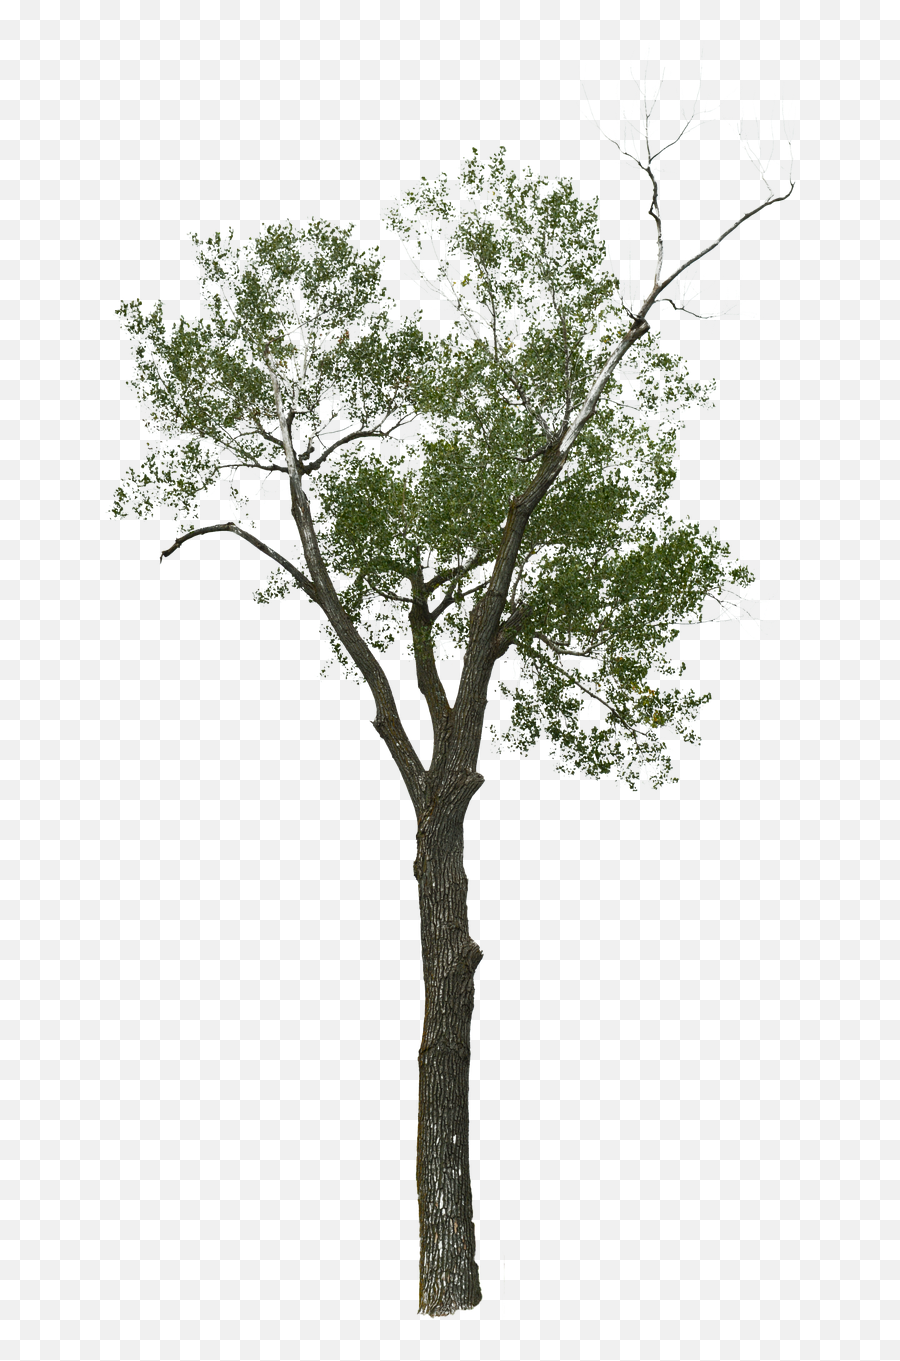 Dead Tree With No - Free Image On Pixabay Tree Png,Dead Tree Png